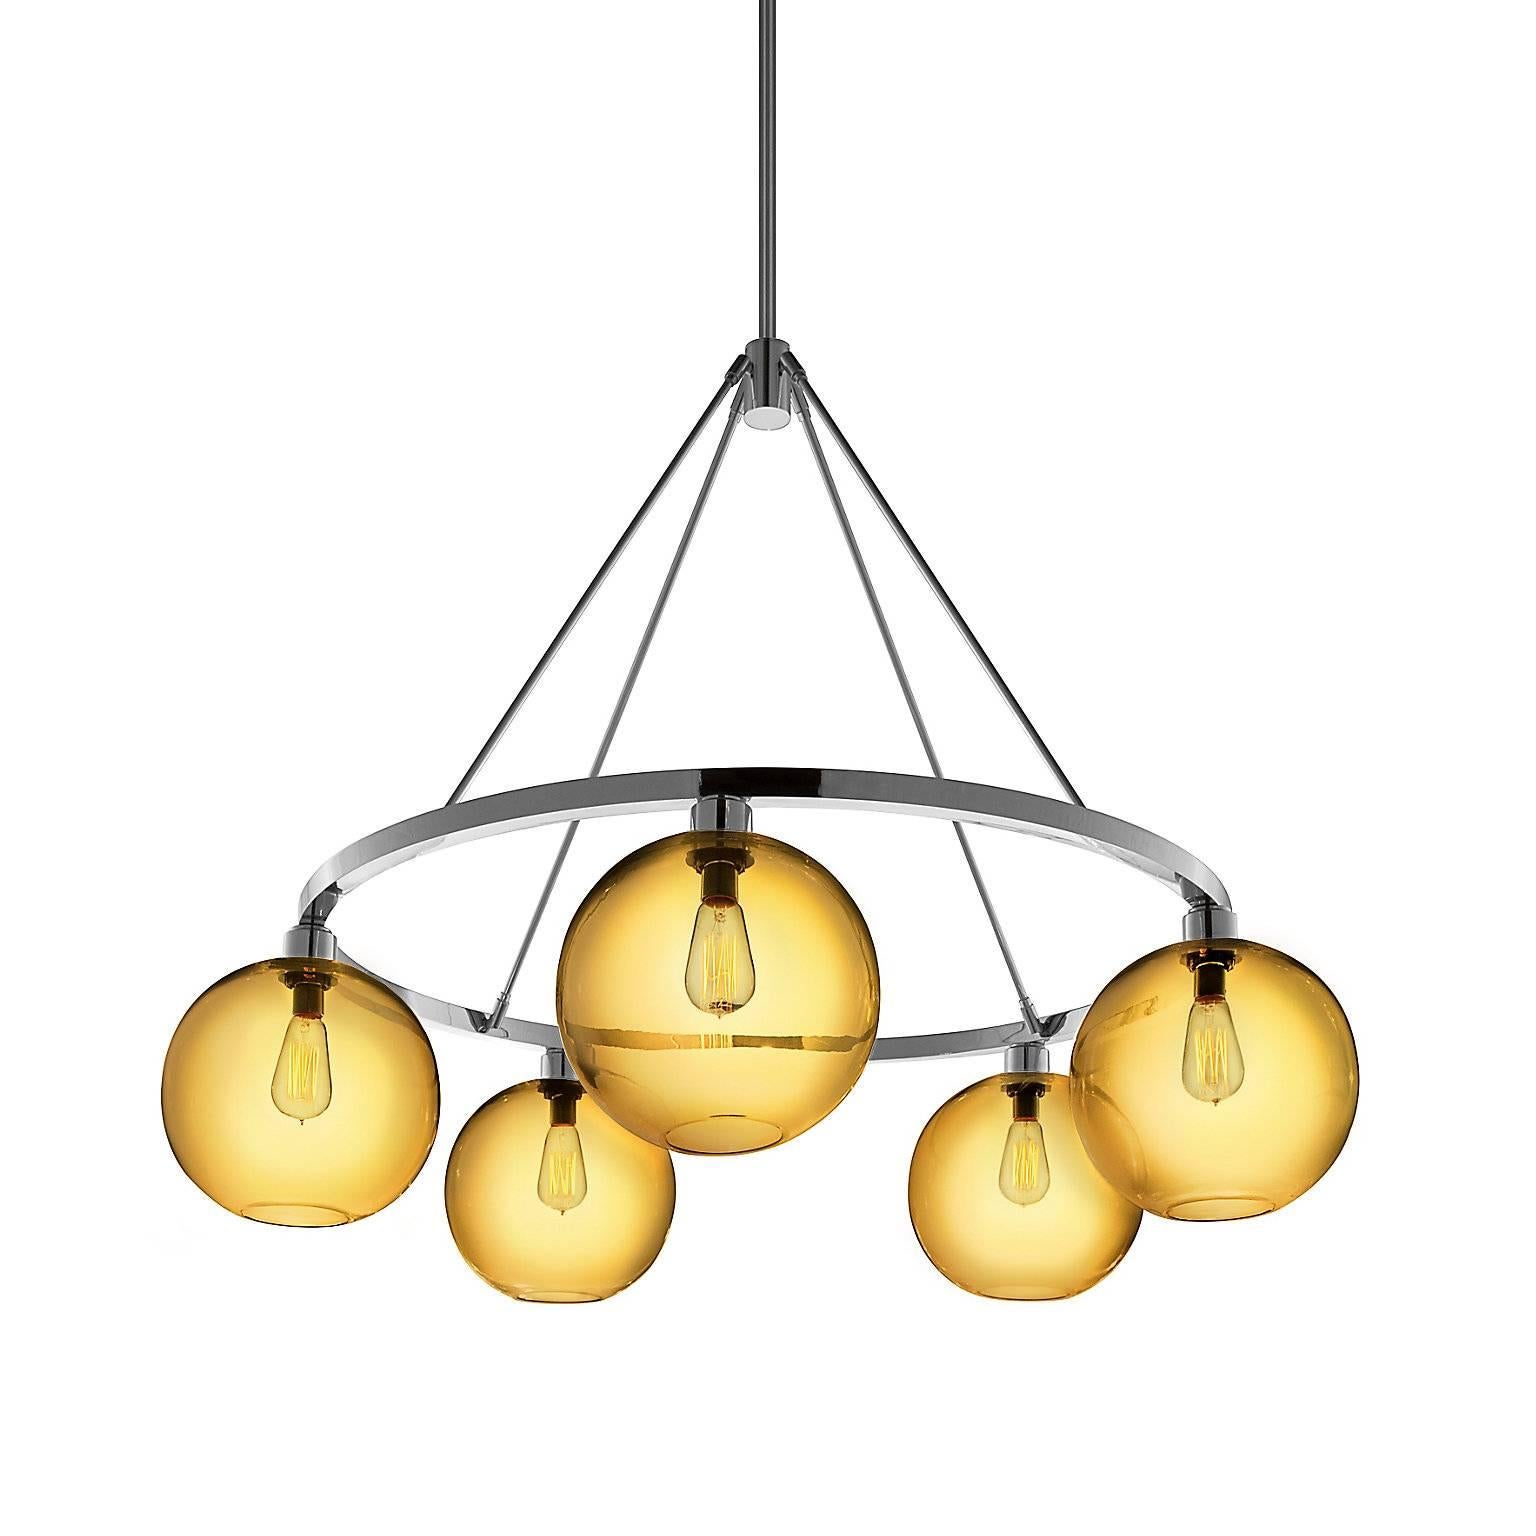 Imbued with timeless style, the striking solitaire chandelier showcases sophisticated metal finishes, a Classic, handcrafted silhouette, and the soft glow of the Edison bulb at its centre. Every single glass light that comes from Niche is handblown